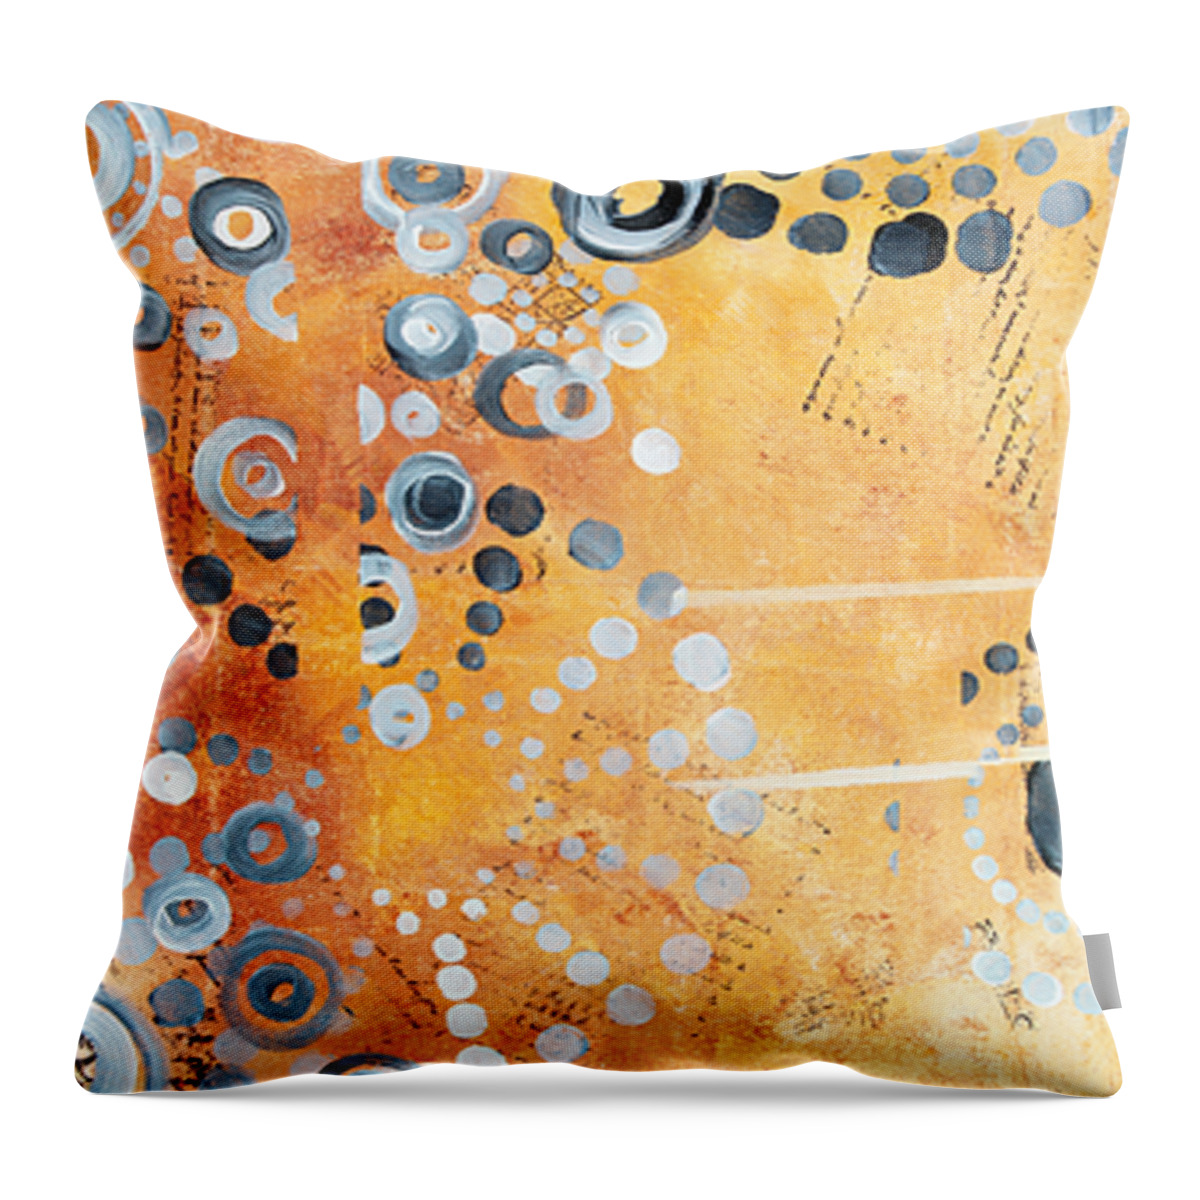 Art Throw Pillow featuring the painting Abstract Decorative Art Original Circles Trendy Painting by MADART Studios by Megan Aroon